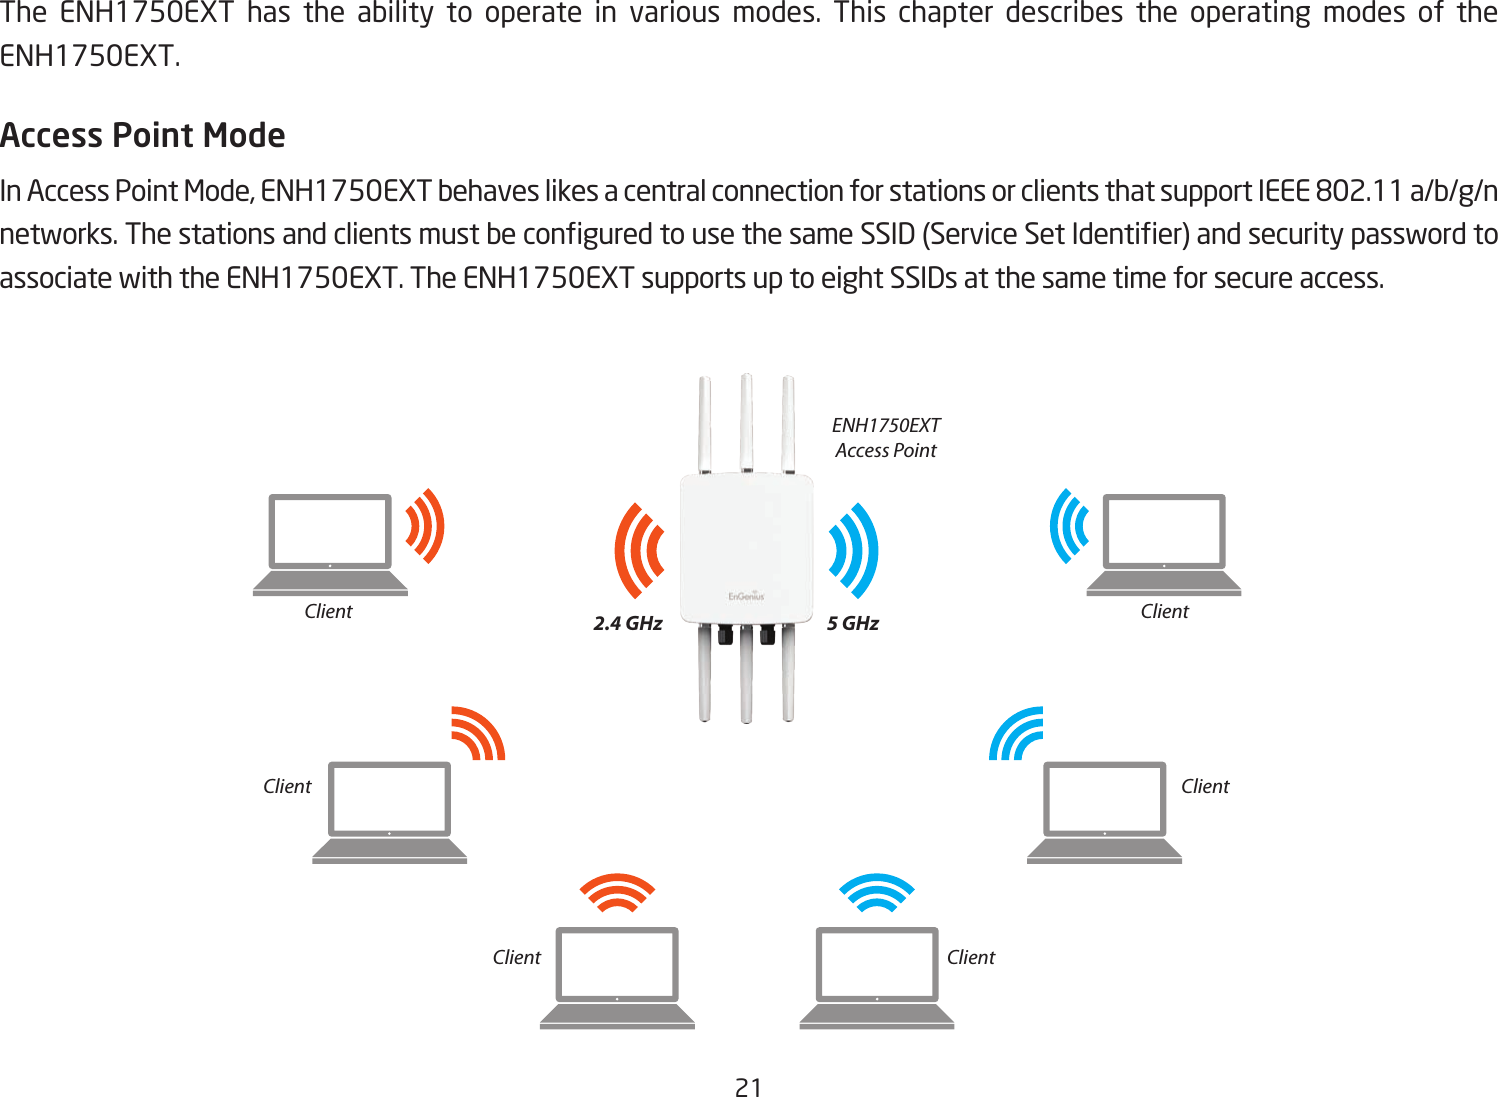 21 The ENH1750EXT has the ability to operate in various modes. This chapter describes the operating modes of the ENH1750EXT.Access Point ModeInAccessPointMode,ENH1750EXTbehaveslikesacentralconnectionforstationsorclientsthatsupportIEEE802.11a/b/g/nnetworks.ThestationsandclientsmustbeconguredtousethesameSSID(ServiceSetIdentier)andsecuritypasswordtoassociate with the ENH1750EXT. The ENH1750EXT supports up to eight SSIDs at the same time for secure access.  ENH1750EXTAccess Point ClientClient ClientClient ClientClient2.4 GHz 5 GHz